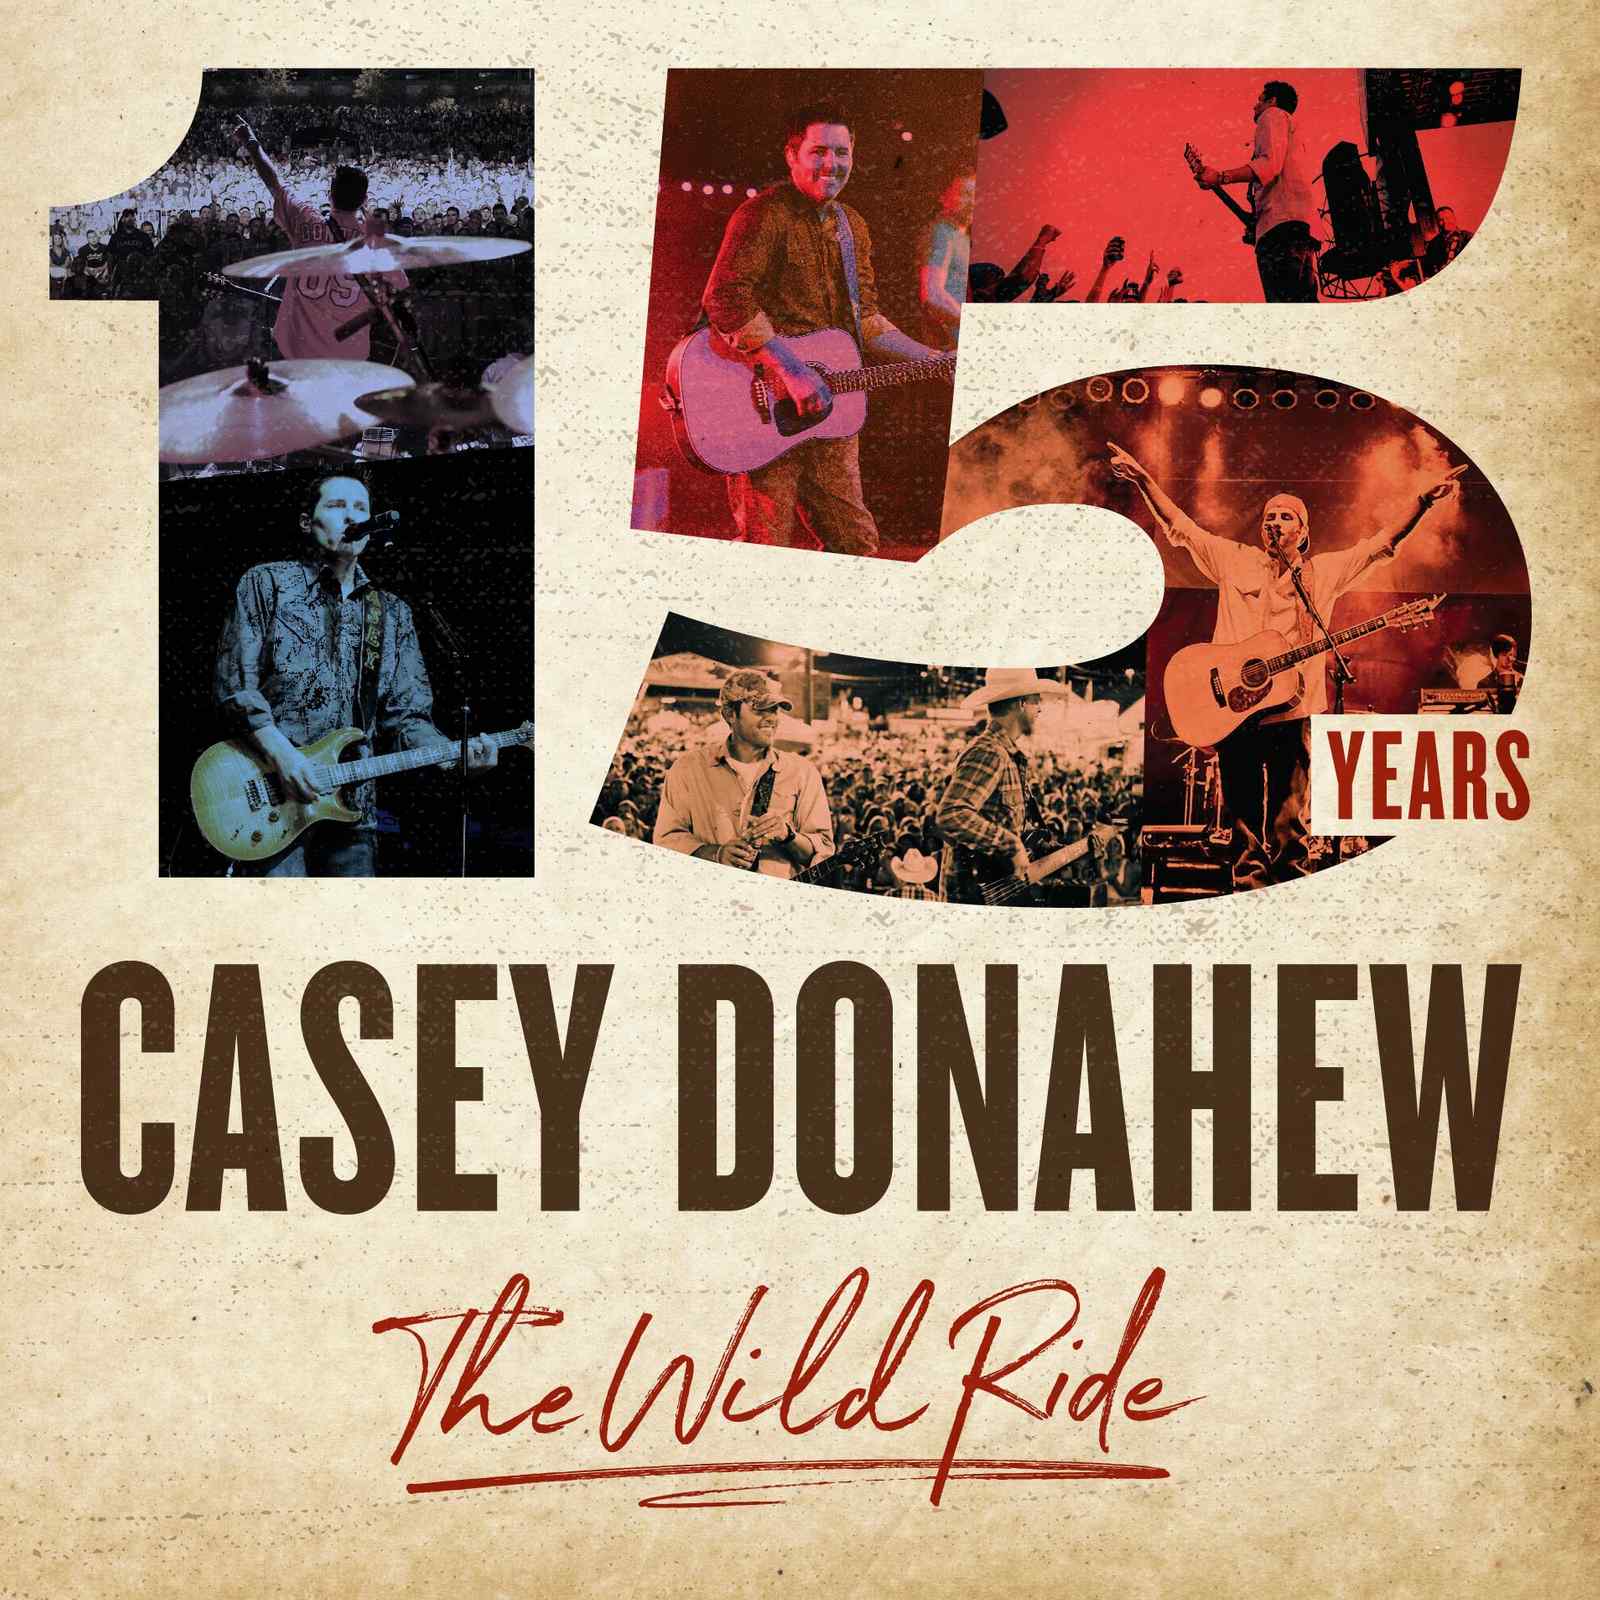 CASEY DONAHEW TO RELEASE 15 YEARS, THE WILD RIDE ON OCTOBER 6TH